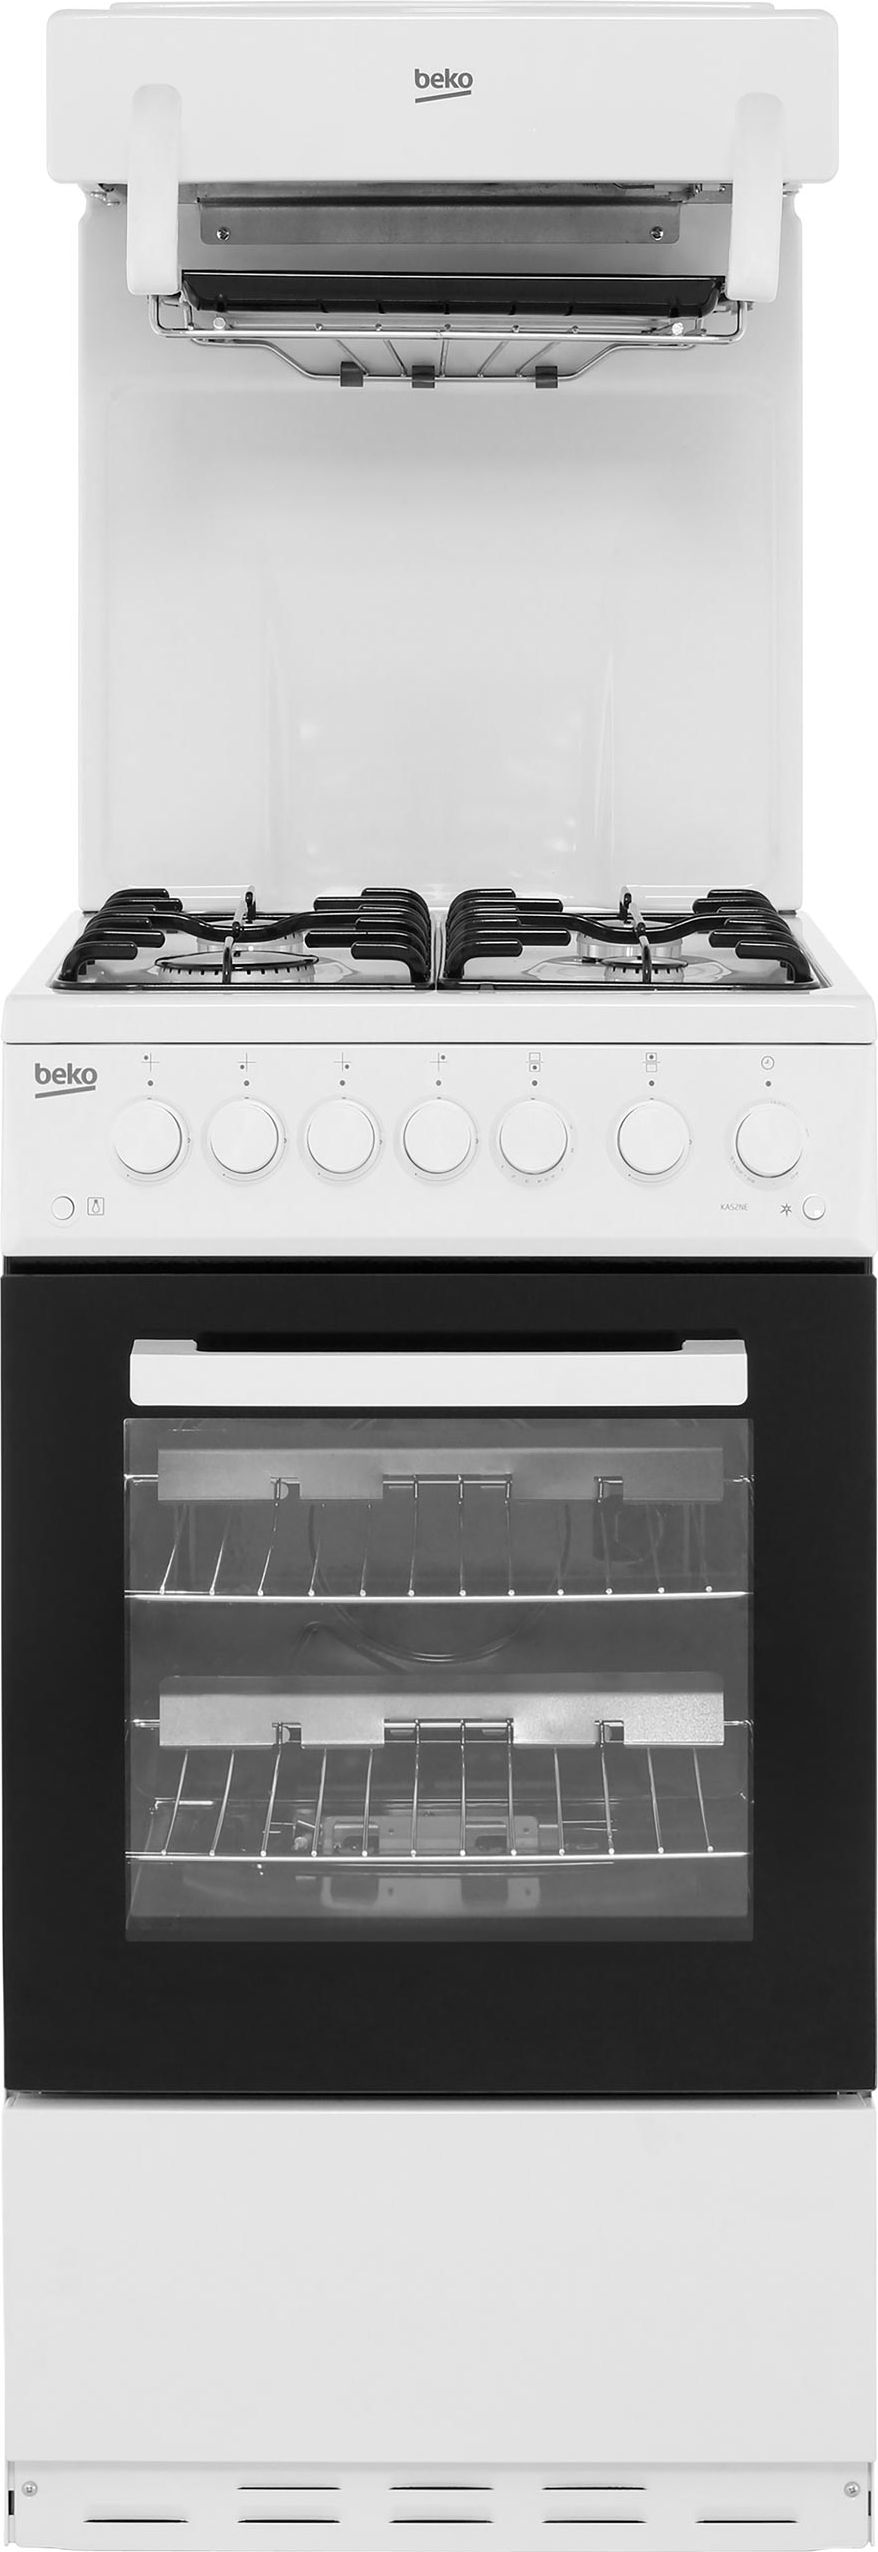 Beko KA52NEW 50cm Freestanding Gas Cooker with Full Width Gas Grill - White - A Rated, White